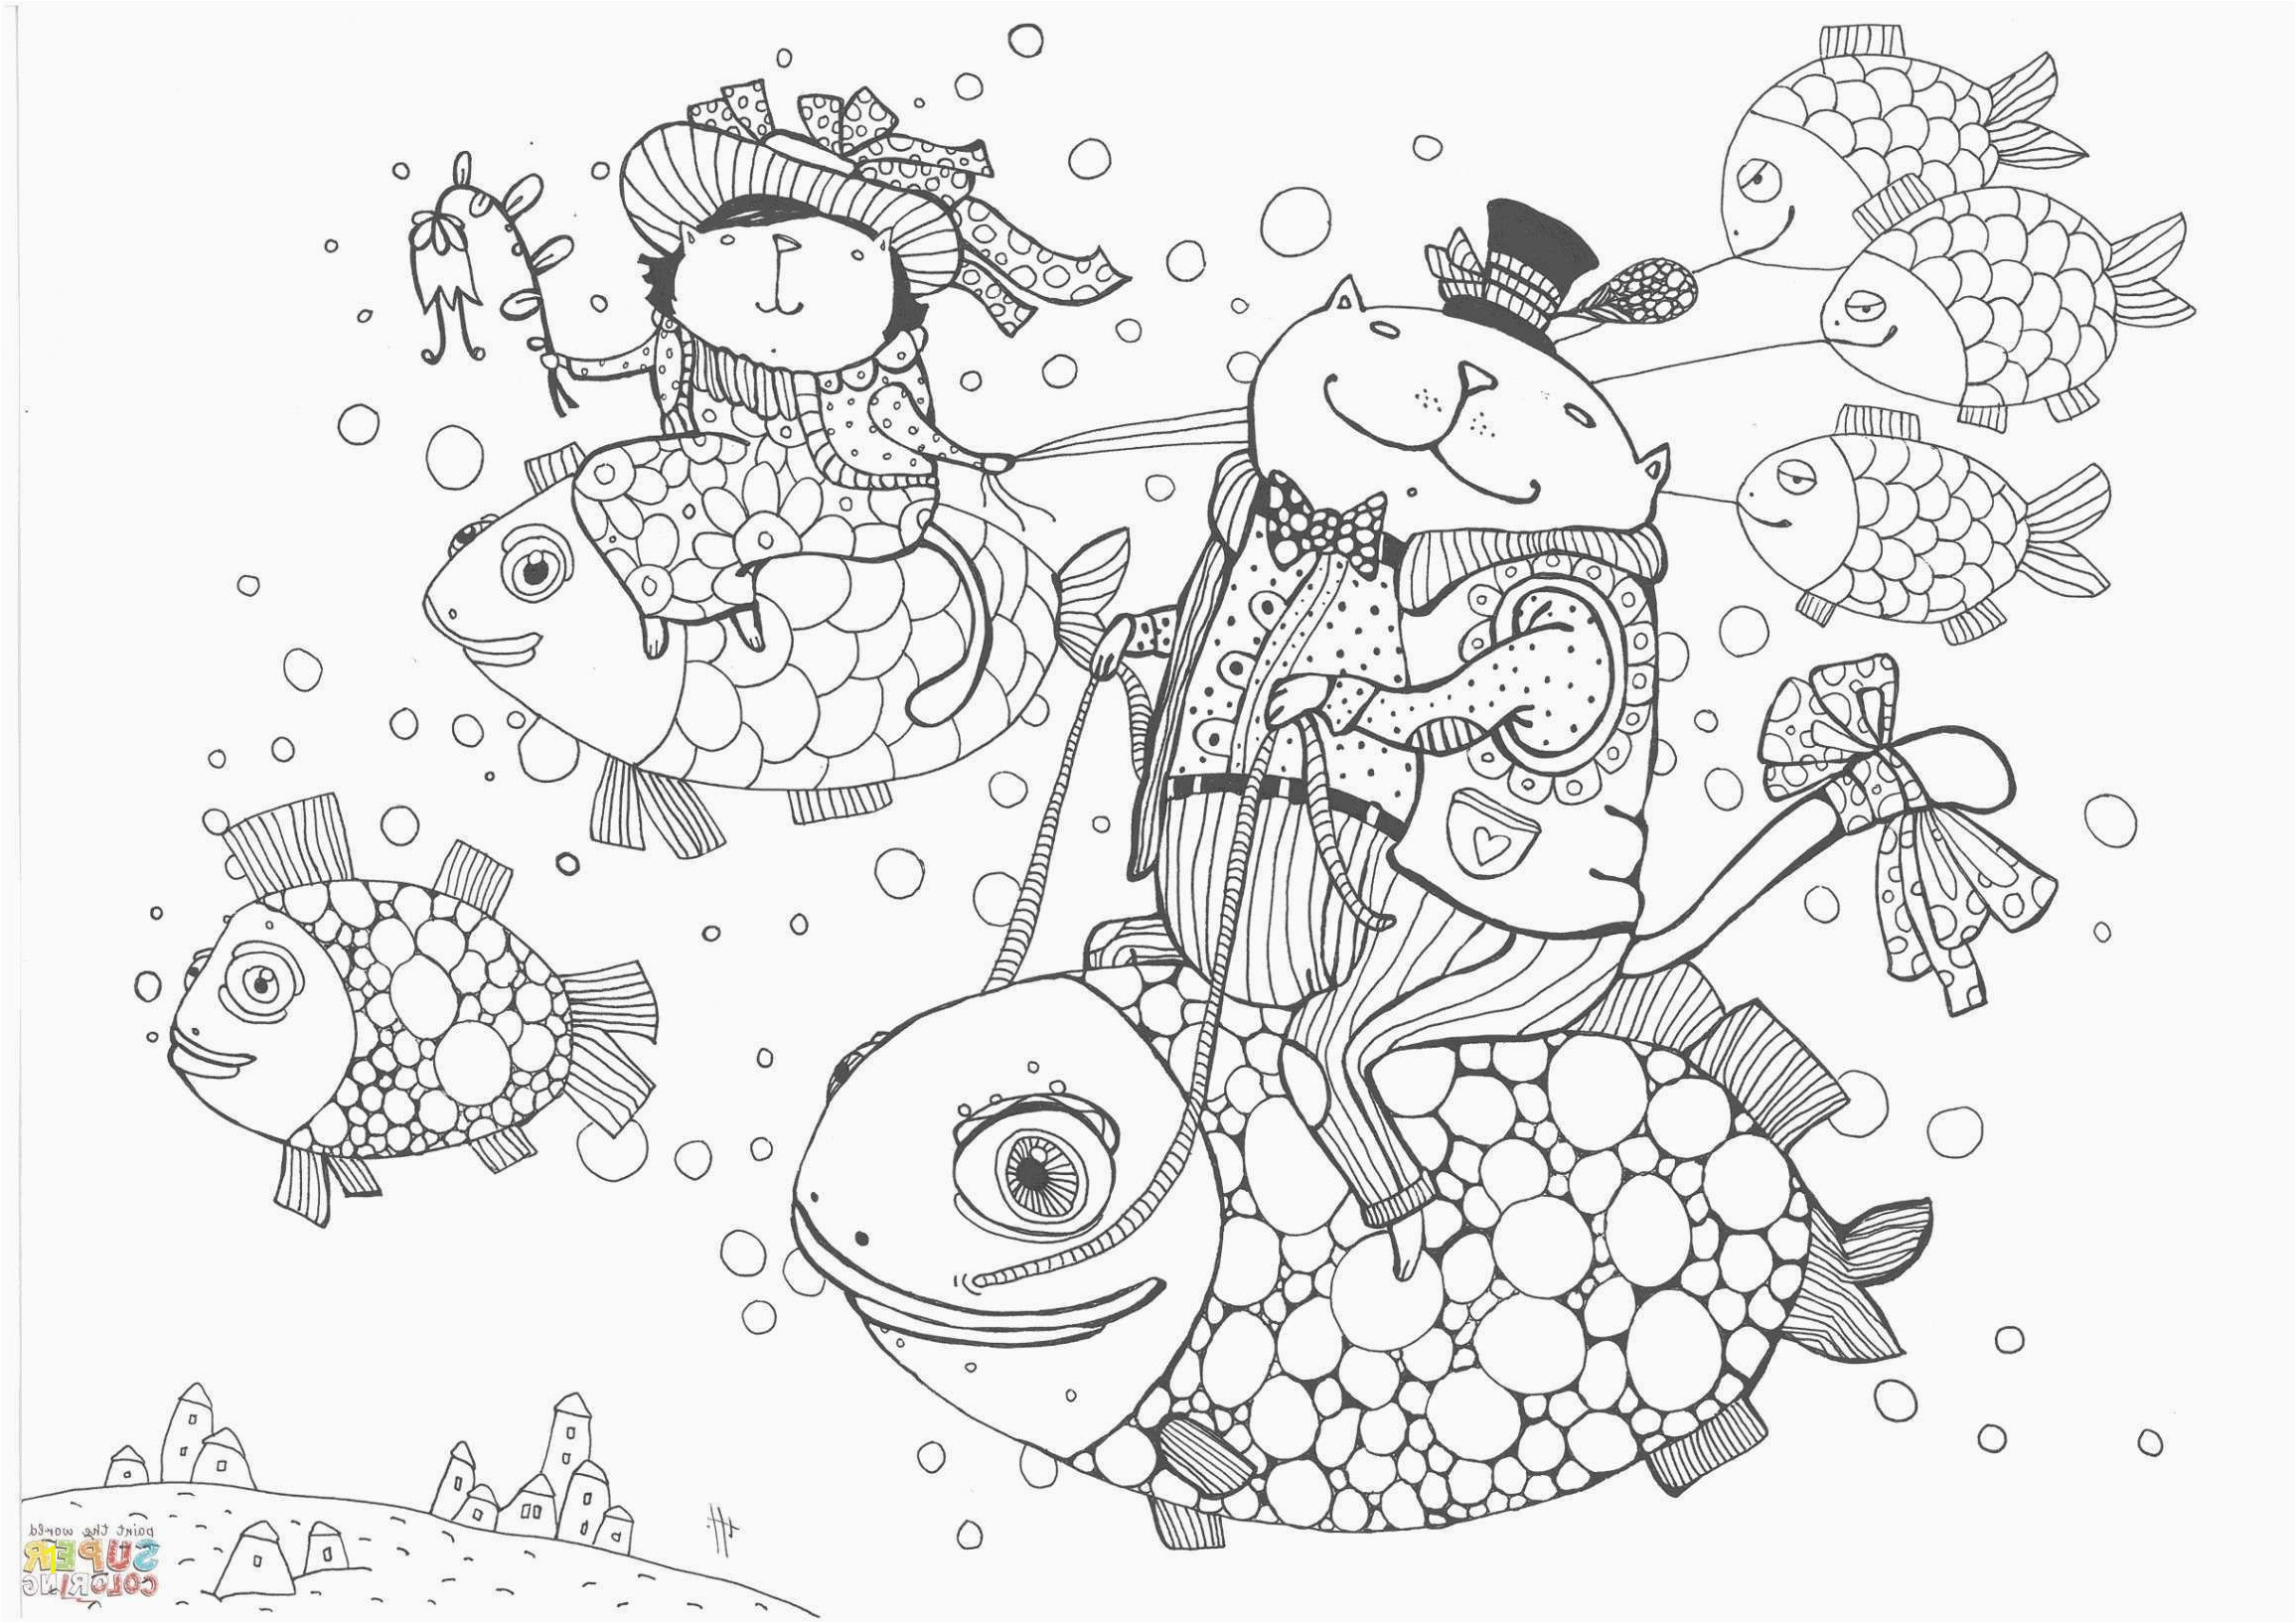 caterpillars coloring page cool collection christmas art coloring pages awesome color beginning with a unique of caterpillars coloring page